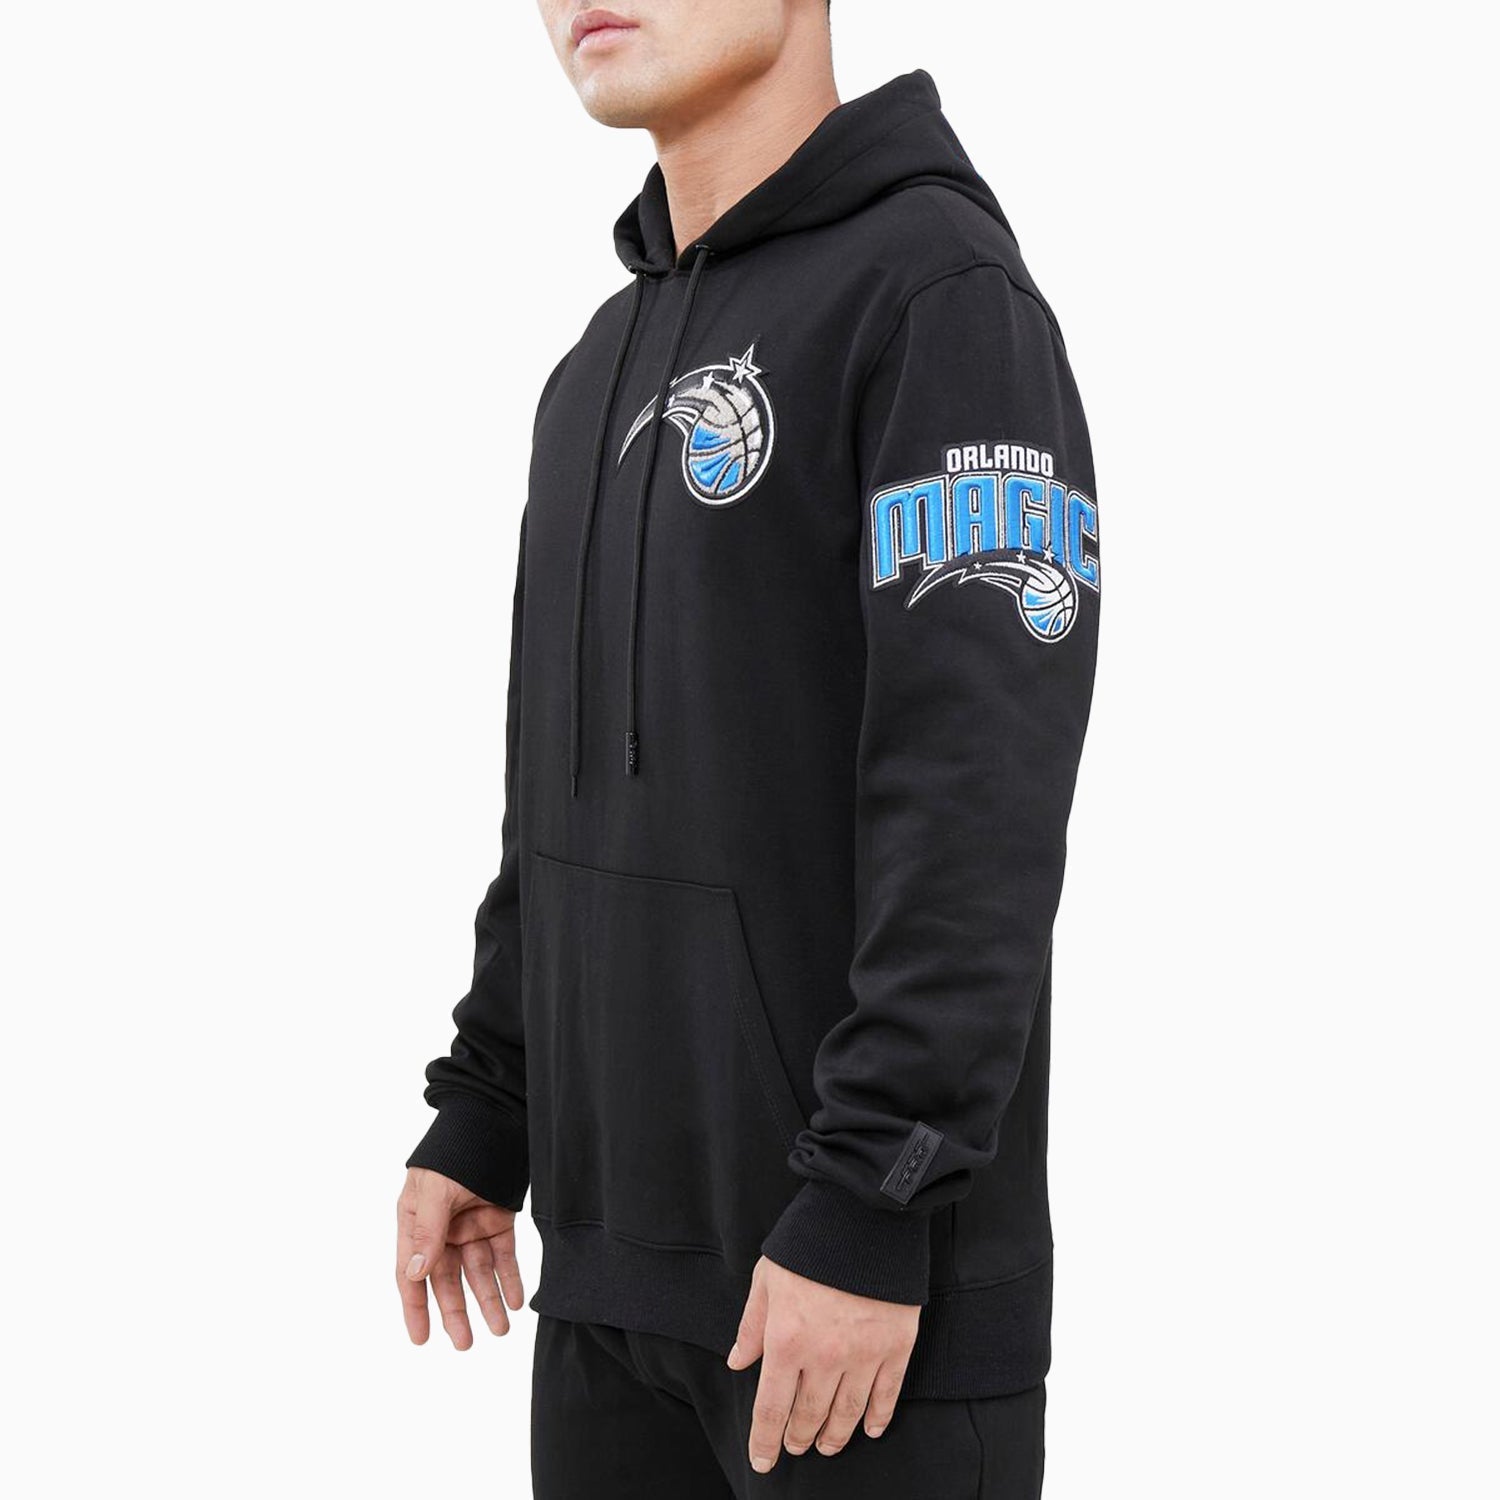 Pro Standard Men's Orlando Magic Logo Pullover Hoodie - Color: Black - Tops and Bottoms USA -